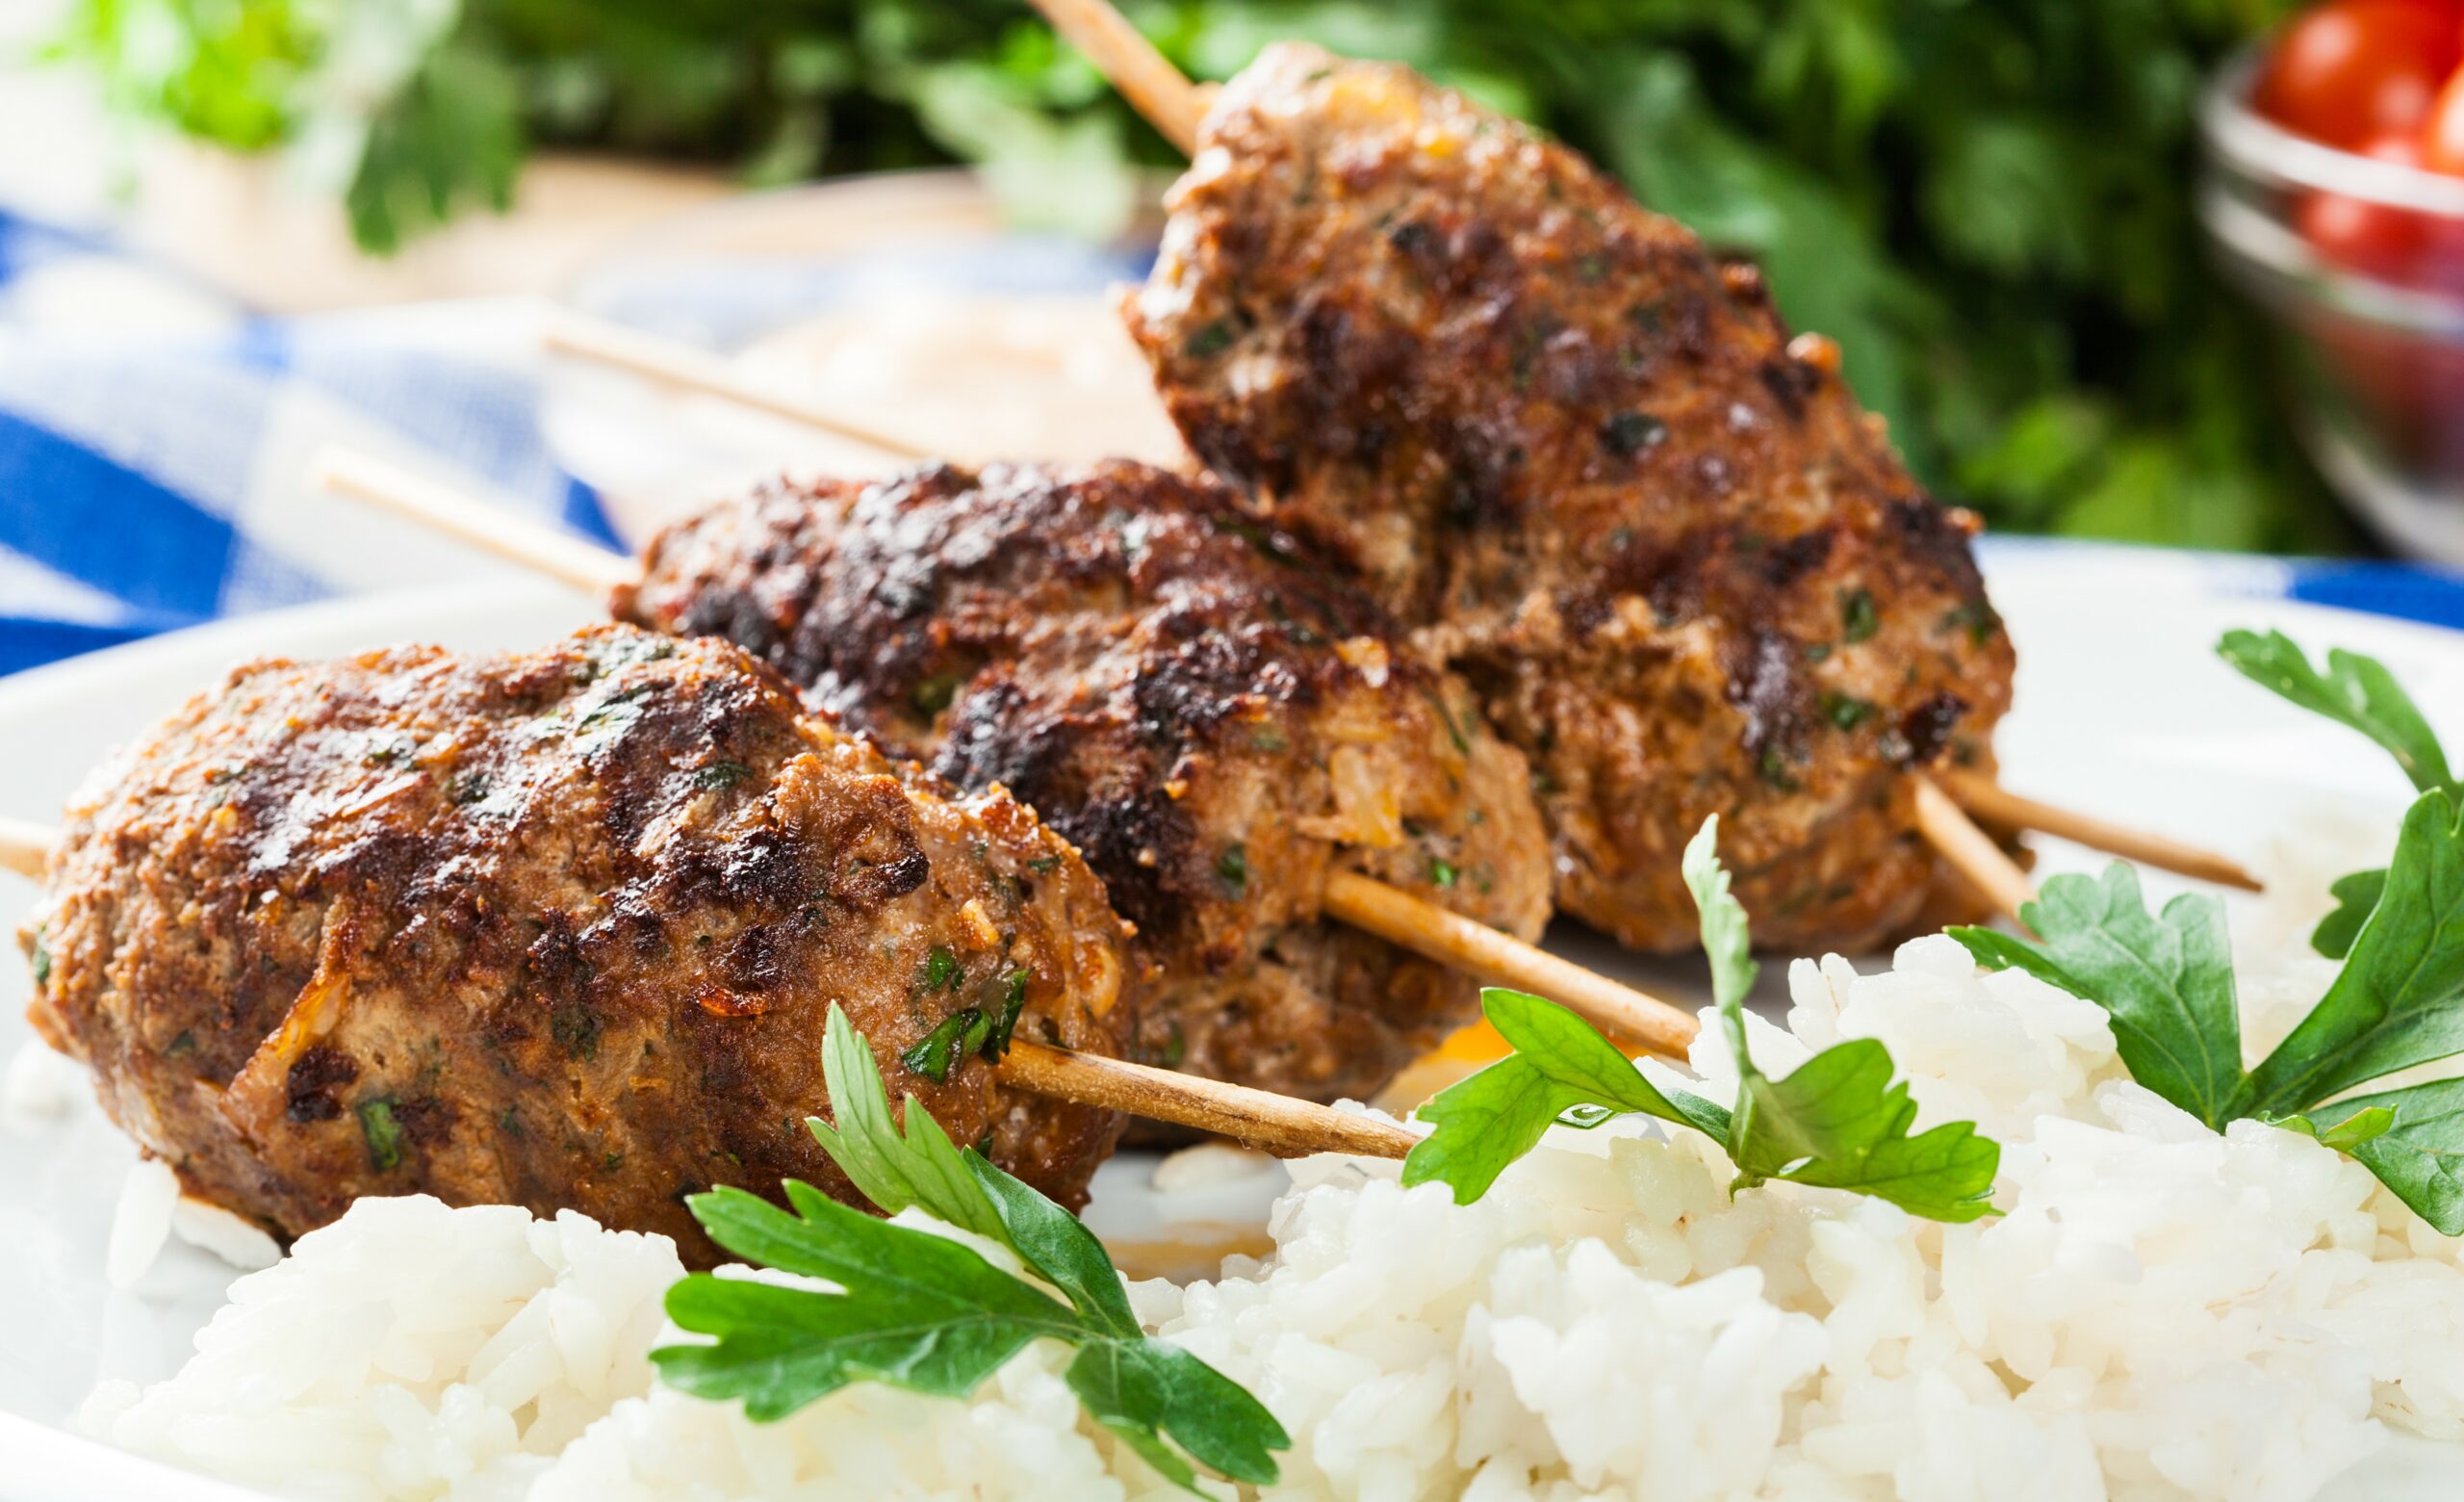 Barbecued kofta with rice on a plate. Selective focus